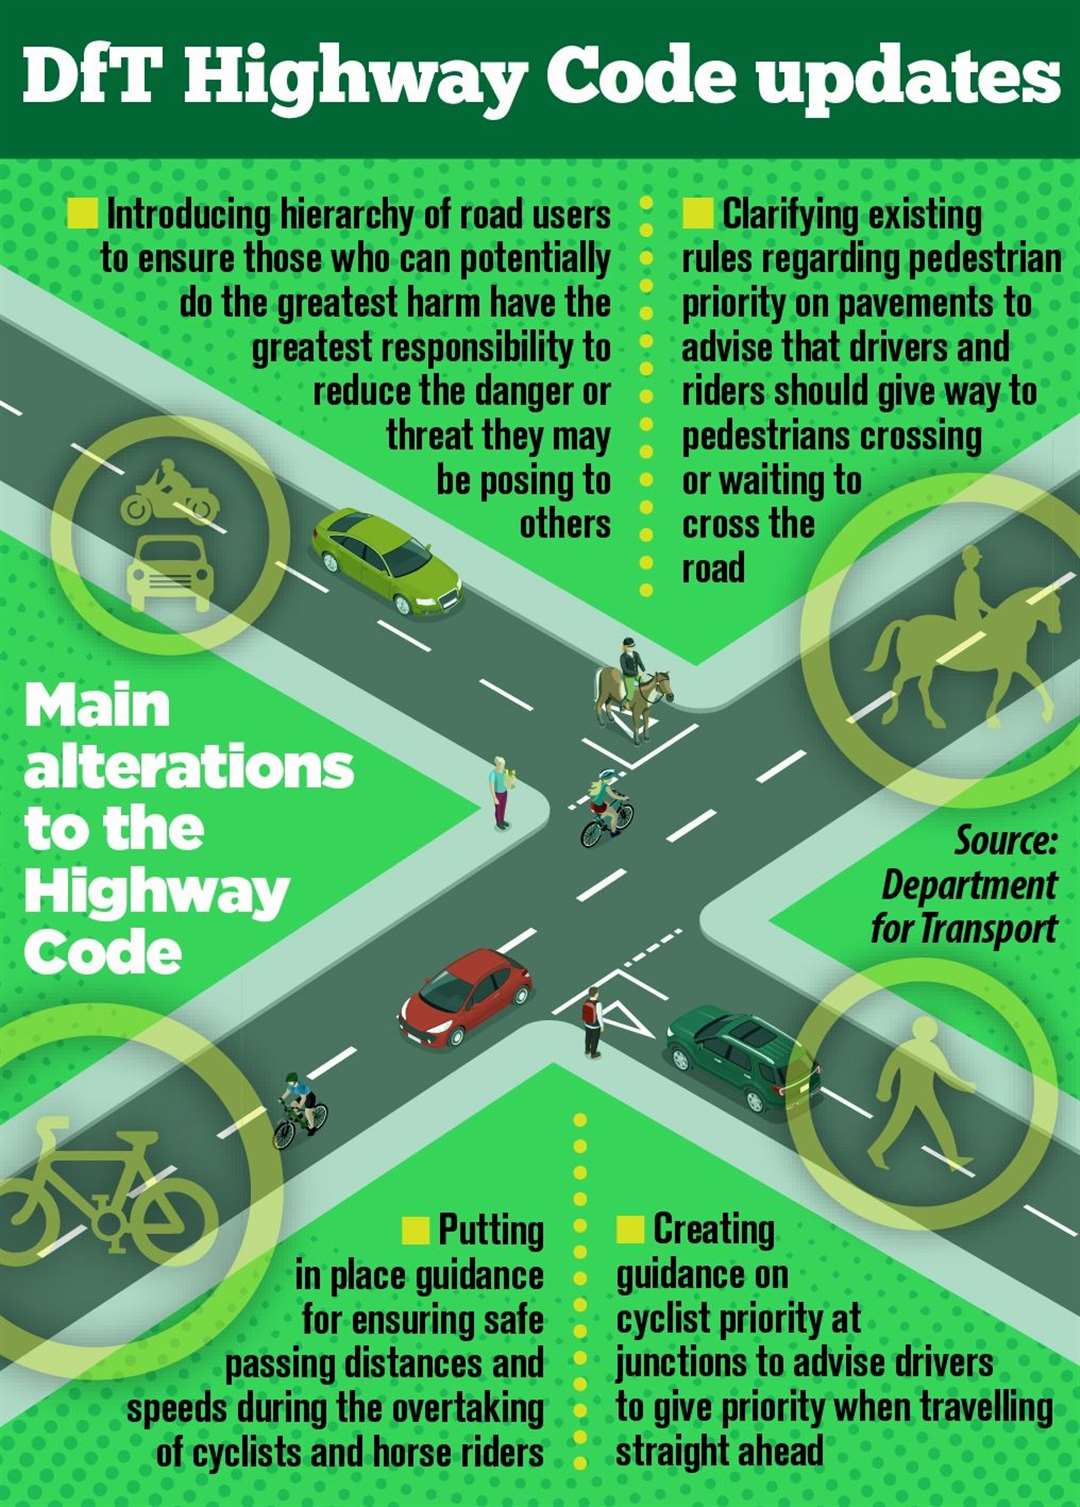 The 2022 Highway Code changes